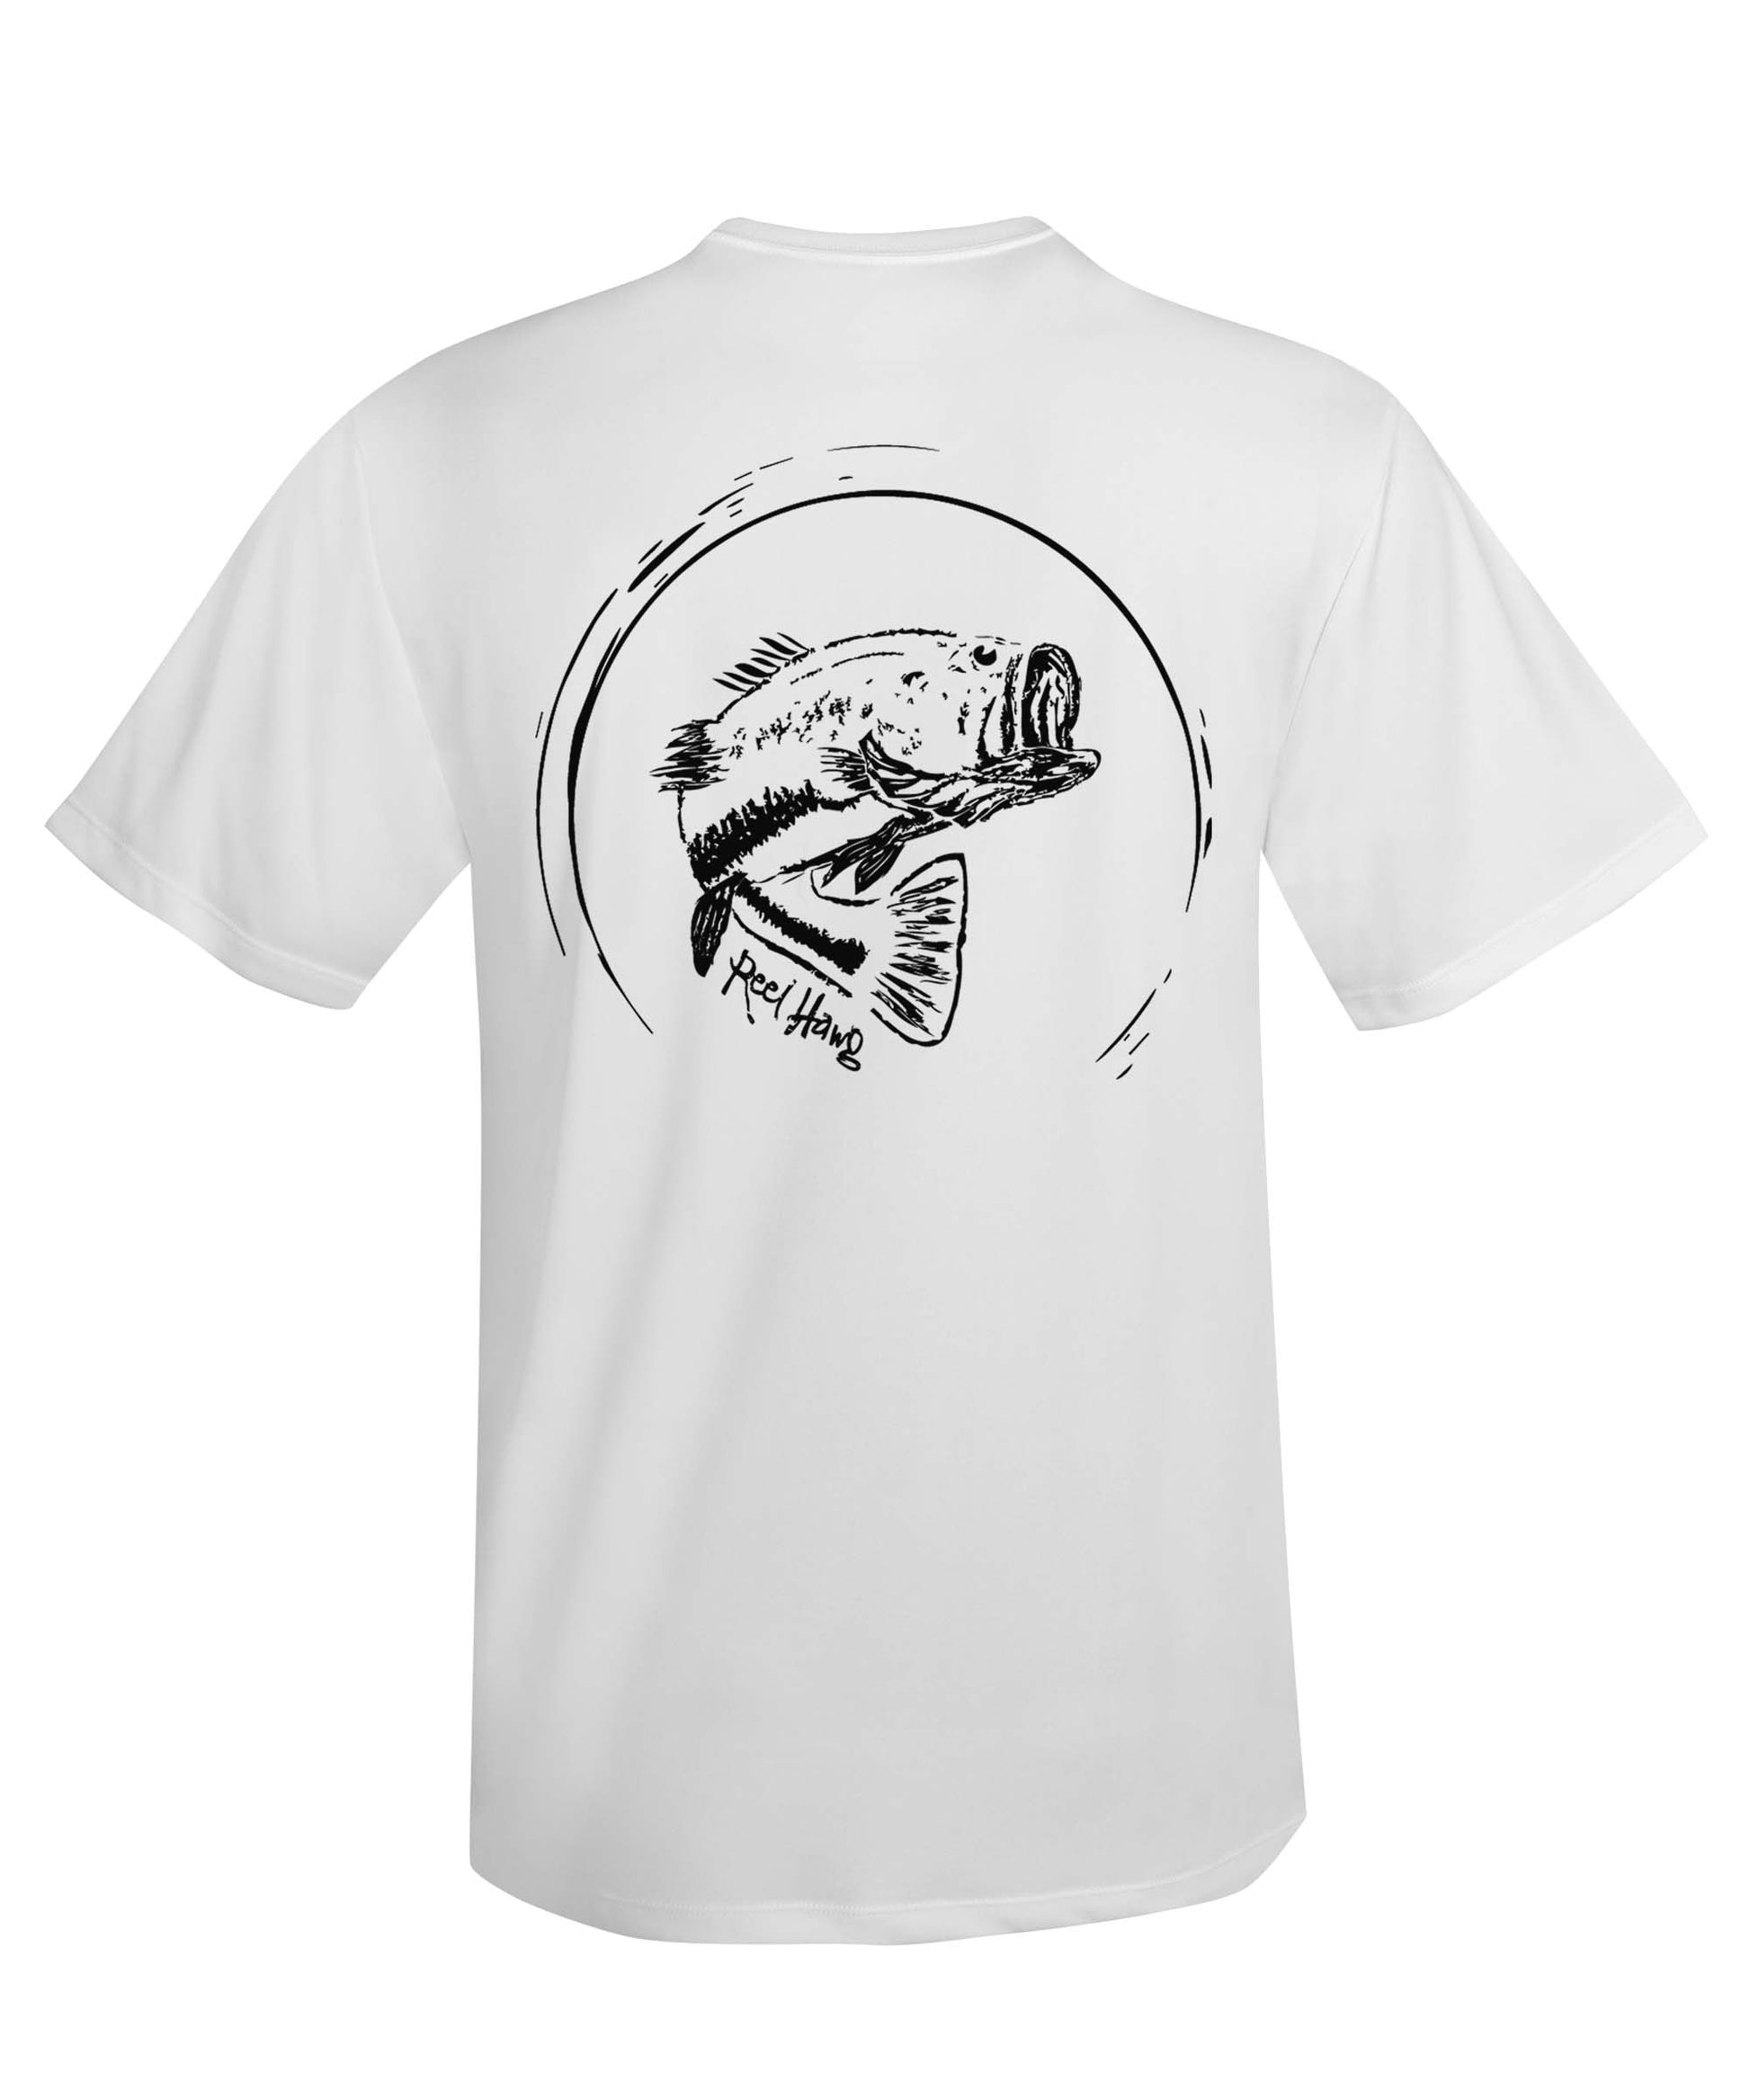 Bass Fishing Performance Dry-Fit 50+ UPF Sun Protection Shirts -Reel Fishy Apparel XS / White S/S - unisex